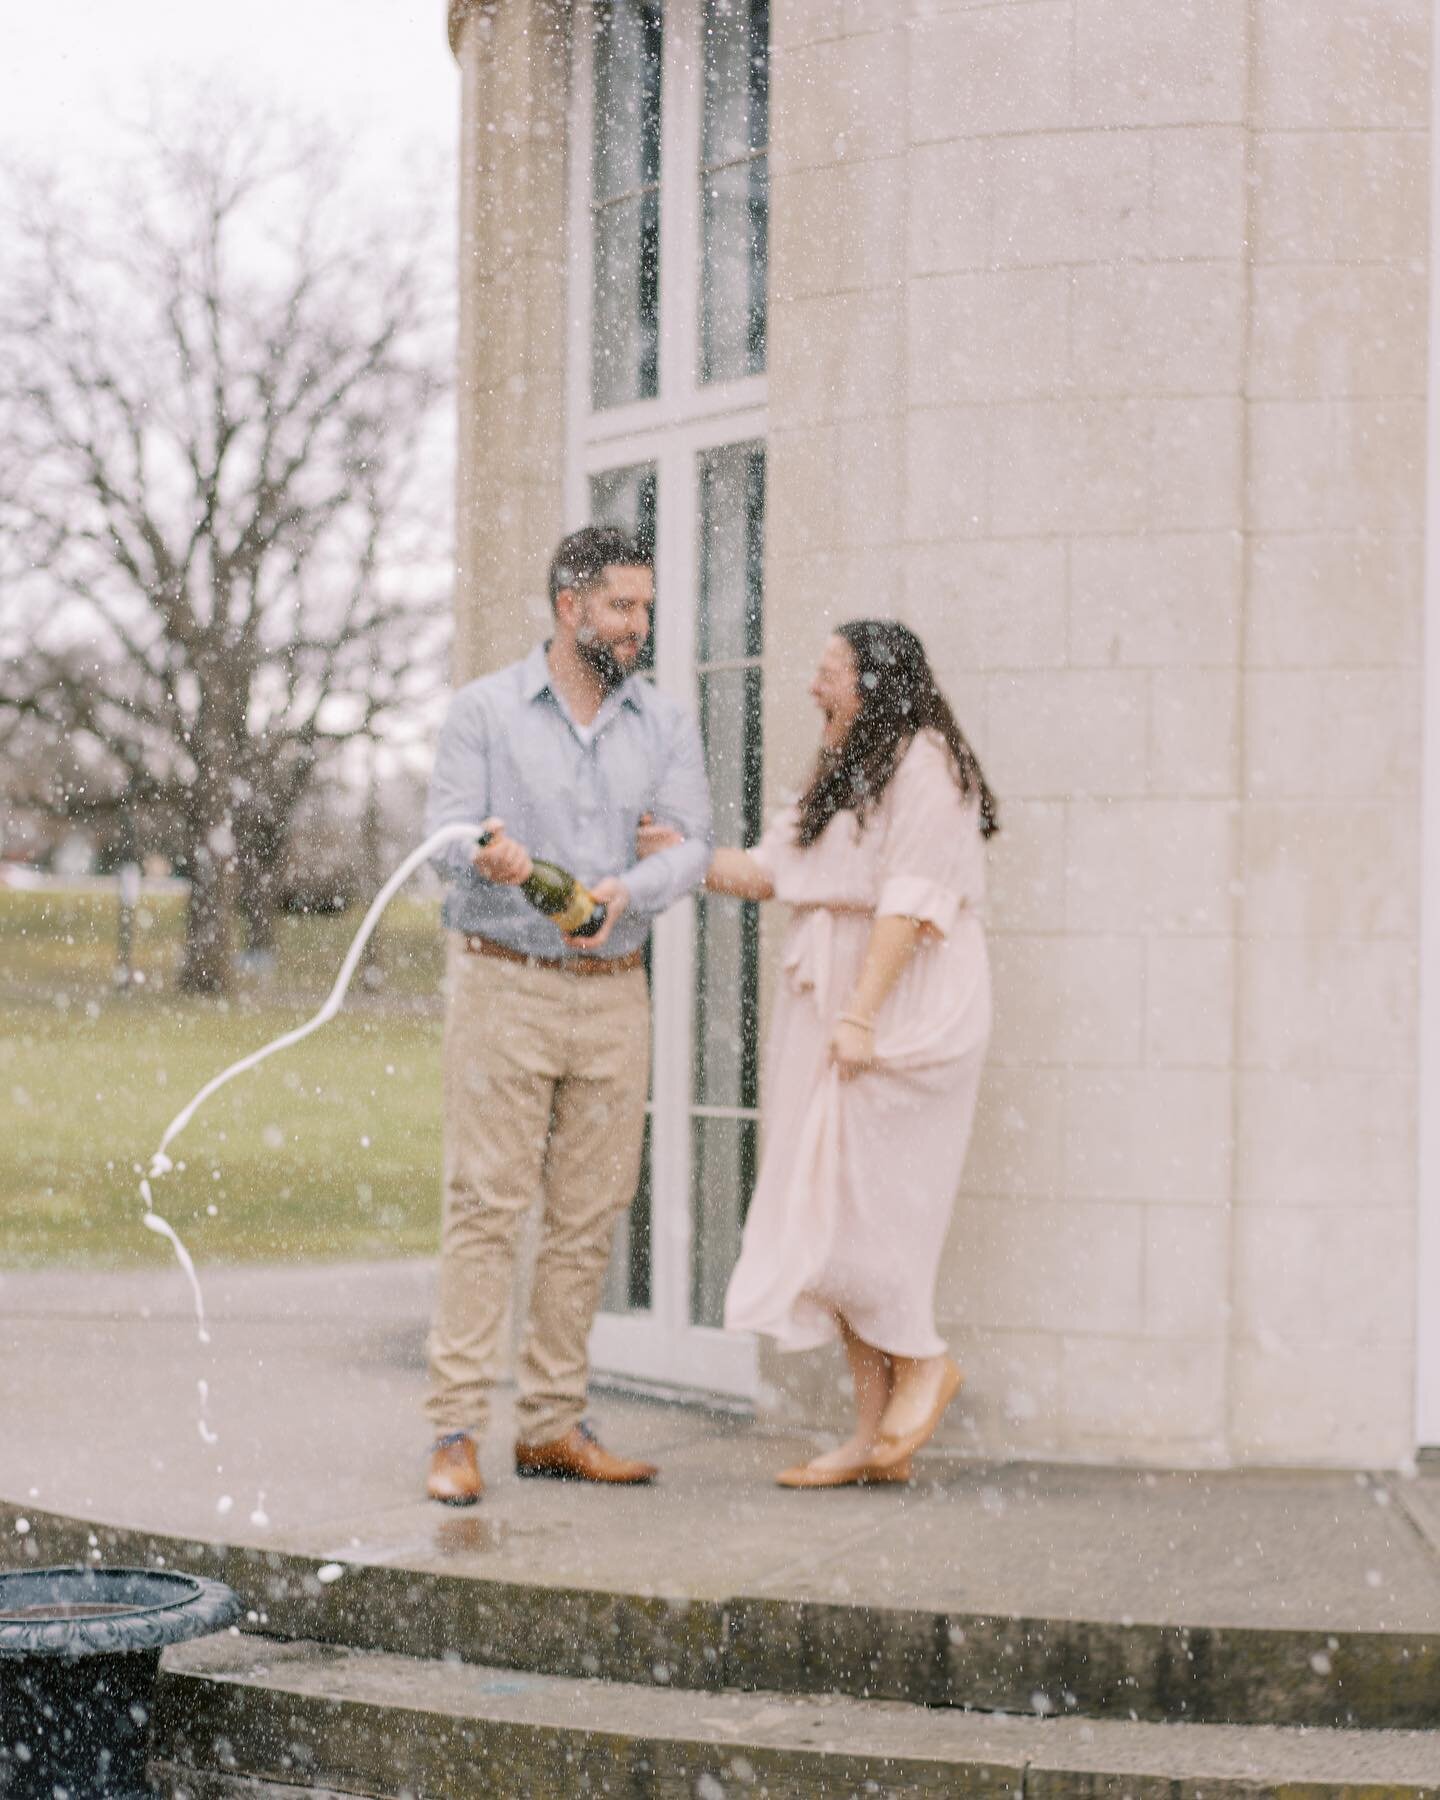 &ldquo;I think I sprayed you with the champagne&rdquo; 

Yup, you got me 😂

When @saranoahphoto asked me to do an anniversary session for her and her husband I legitimately ignored her and changed the subject. Photographing another photographer is *